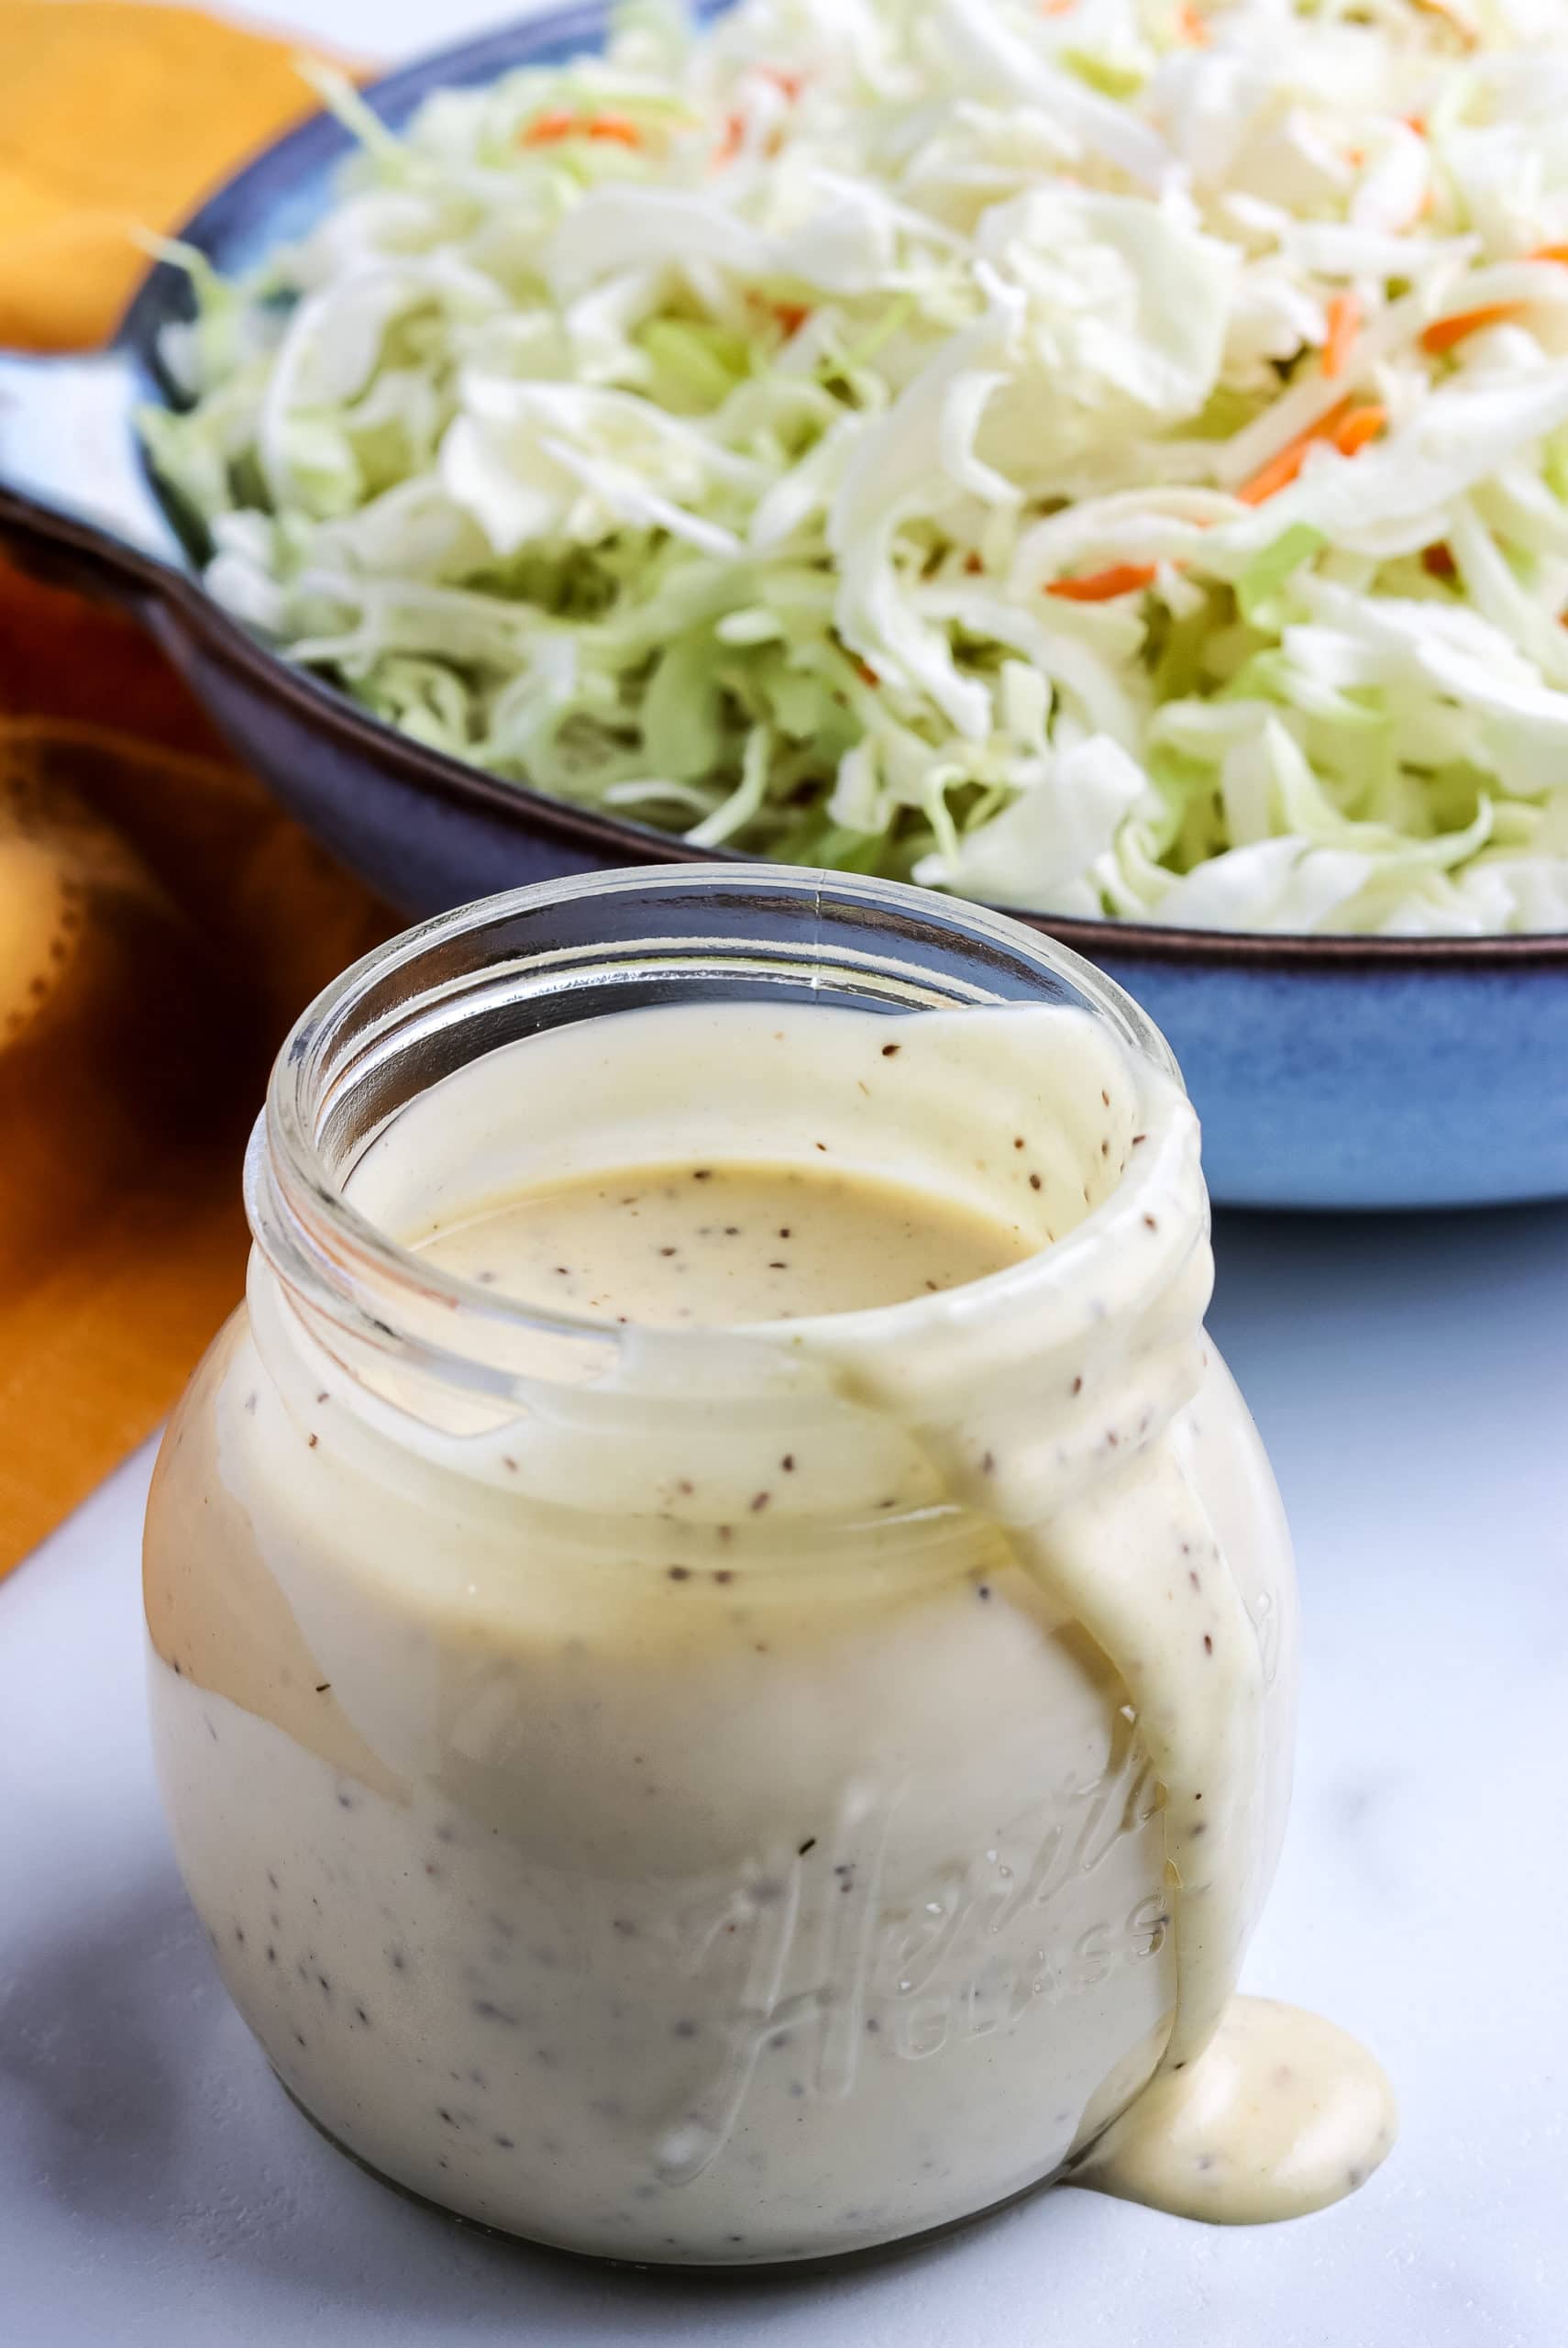 How to Make Coleslaw Dressing